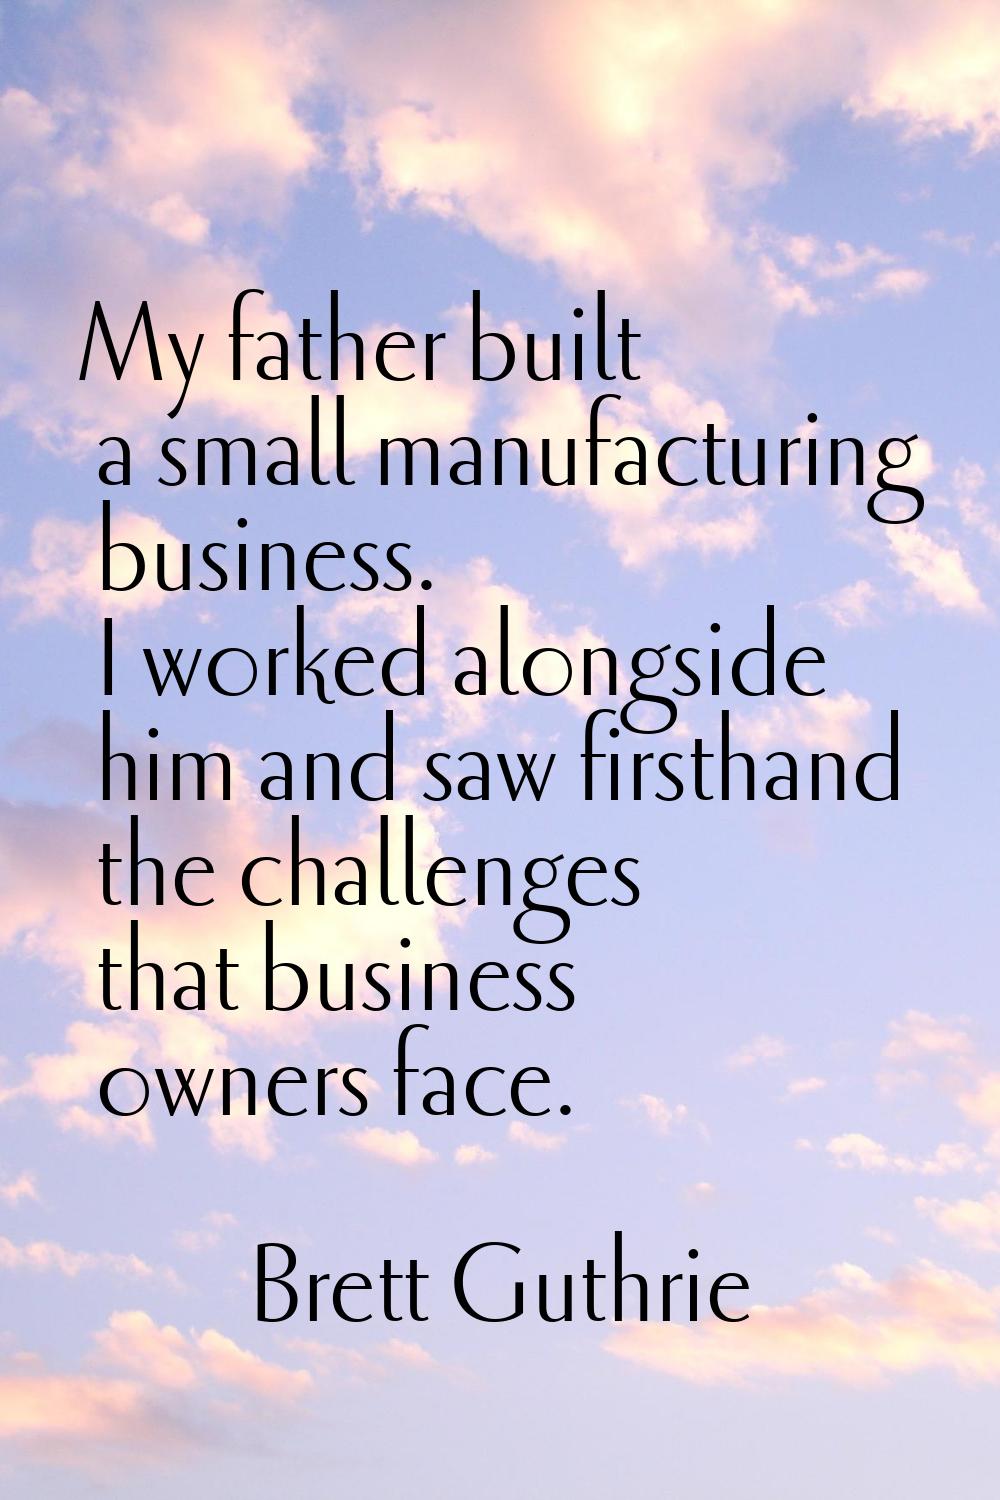 My father built a small manufacturing business. I worked alongside him and saw firsthand the challe